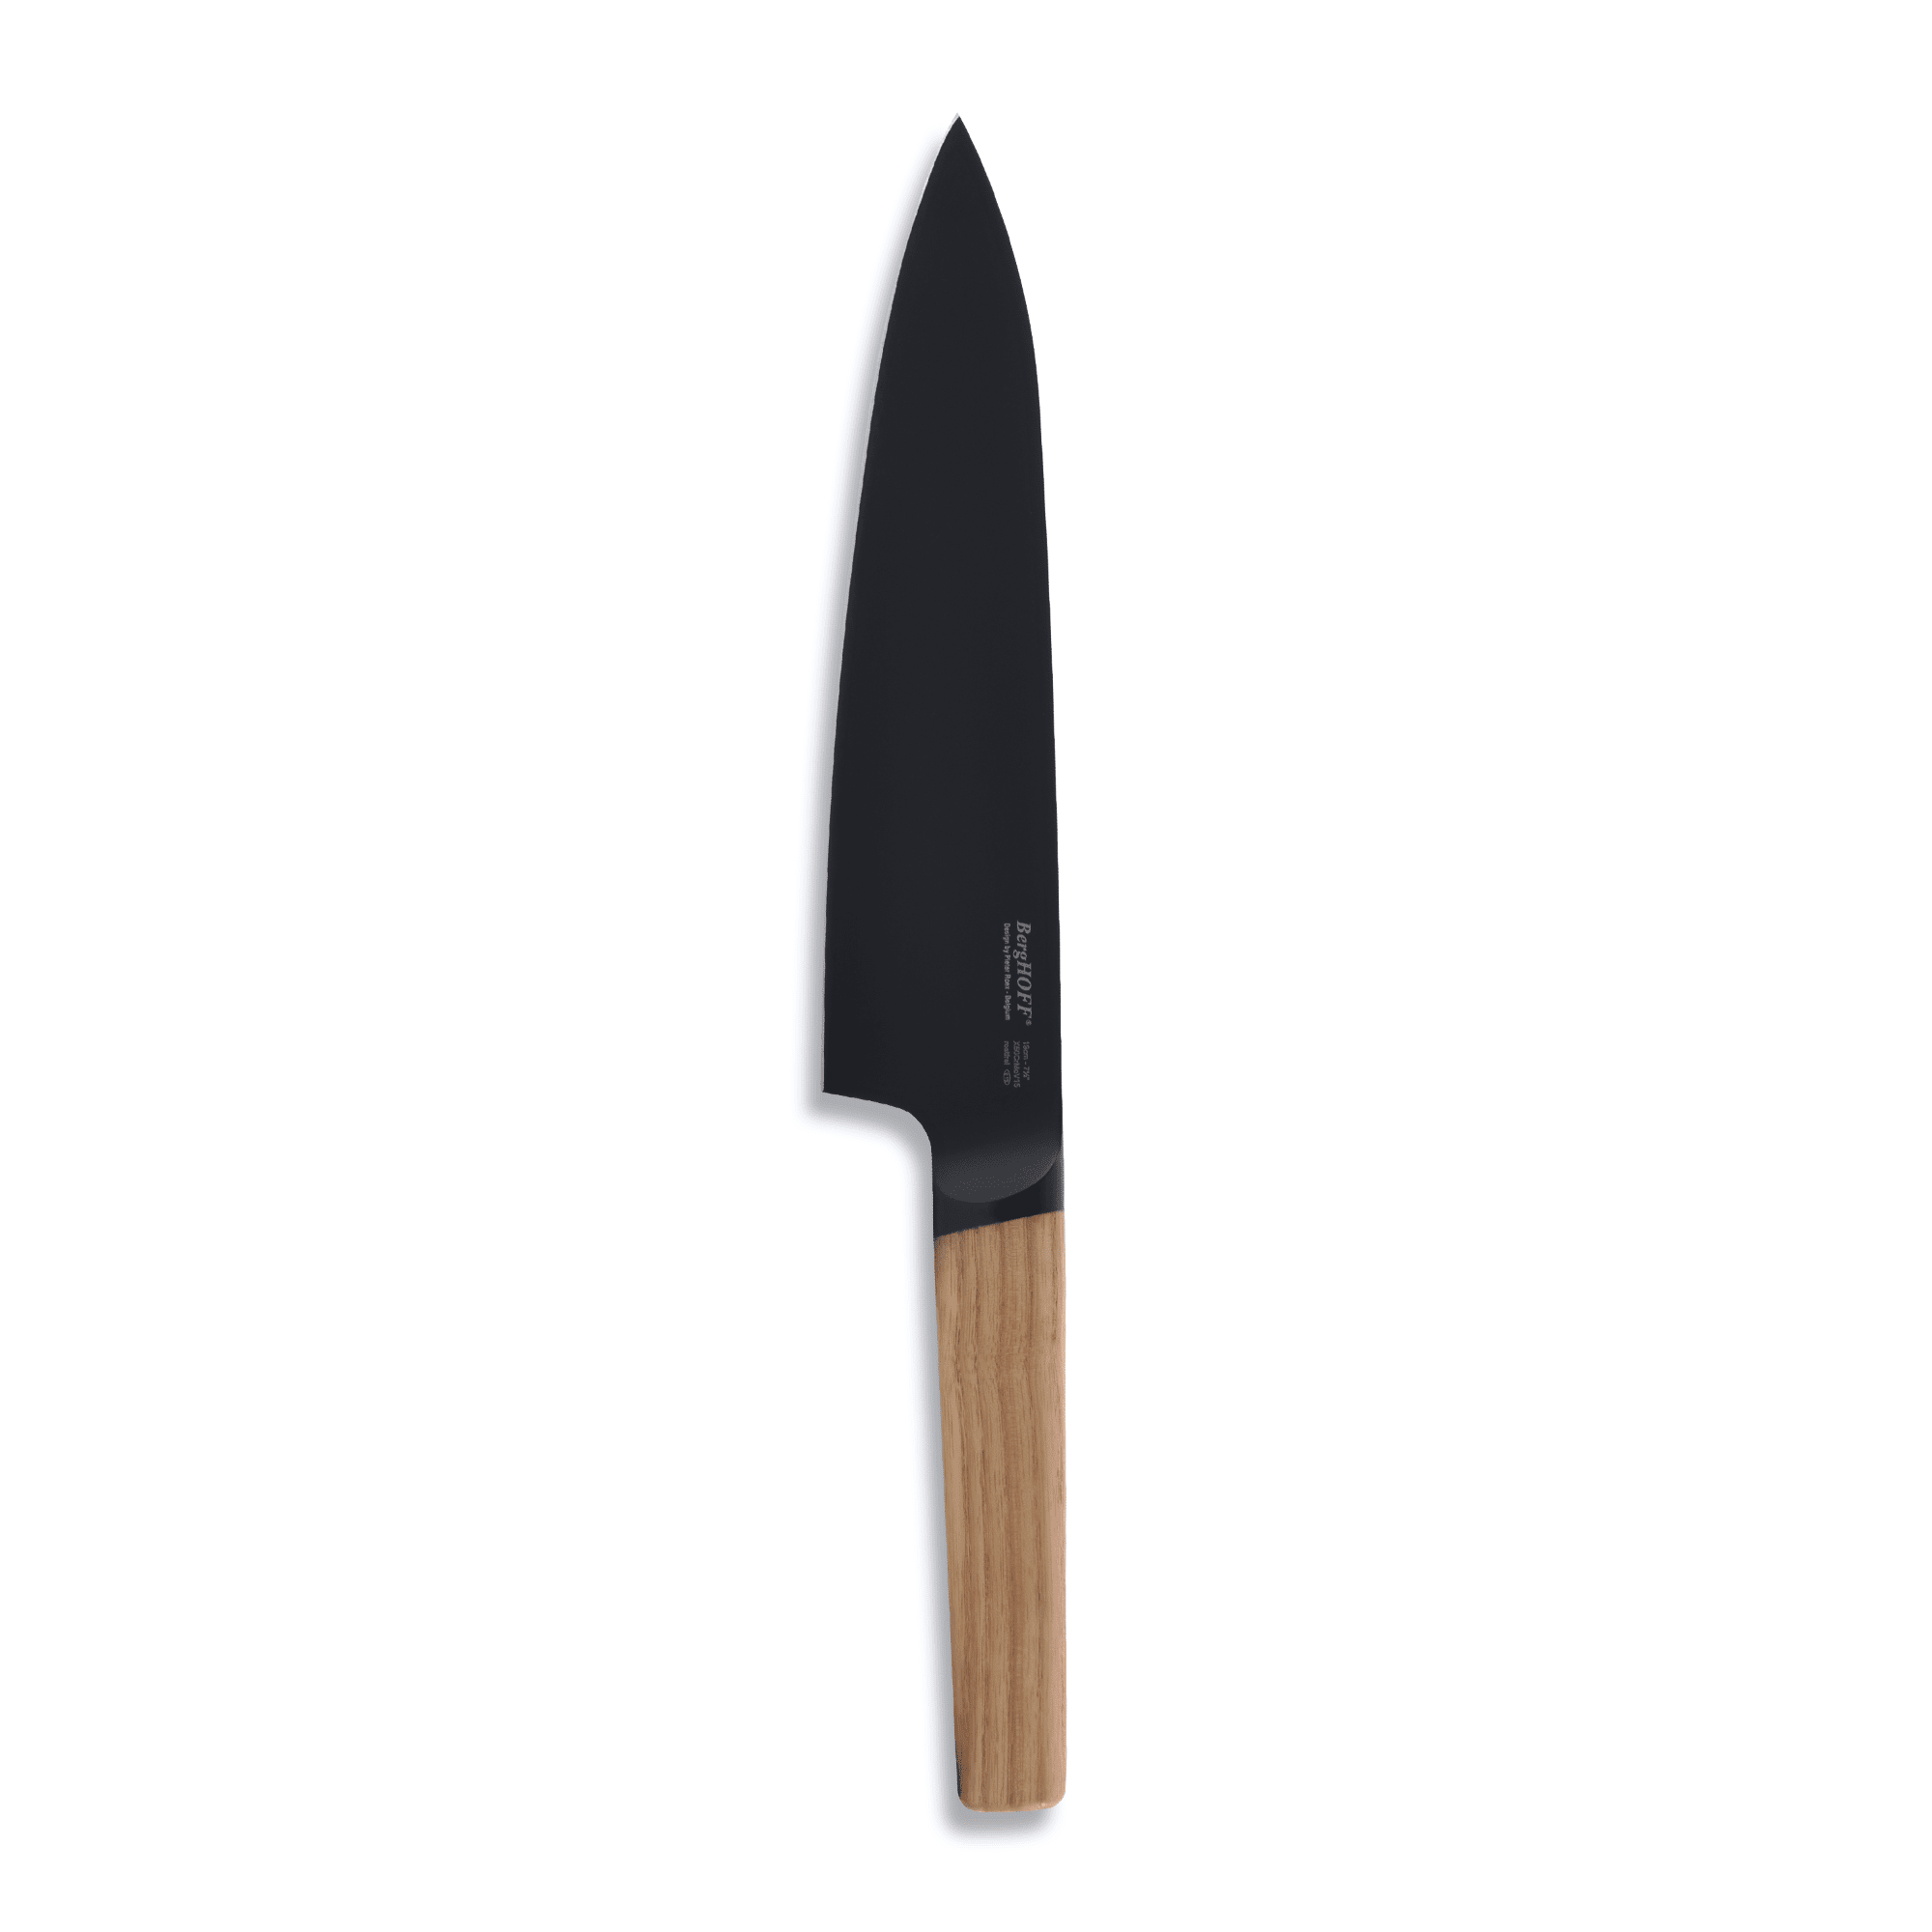 BergHOFF - Ron Chef's Knife with Wooden Handle  - Stainless Steel - 32.5cm - 6600099